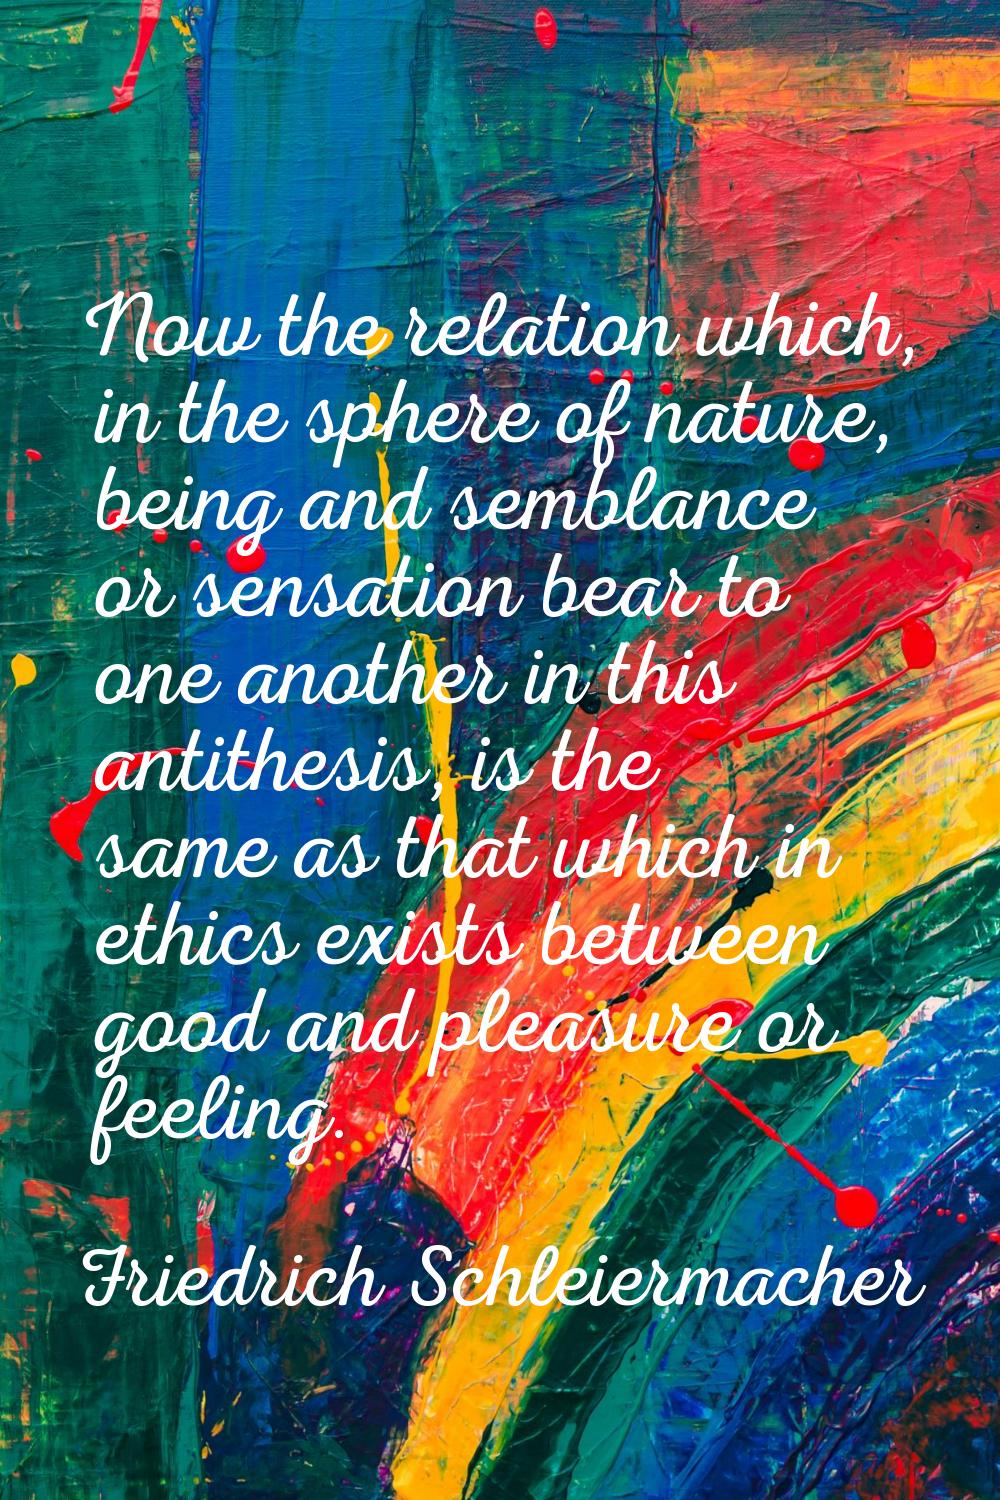 Now the relation which, in the sphere of nature, being and semblance or sensation bear to one anoth